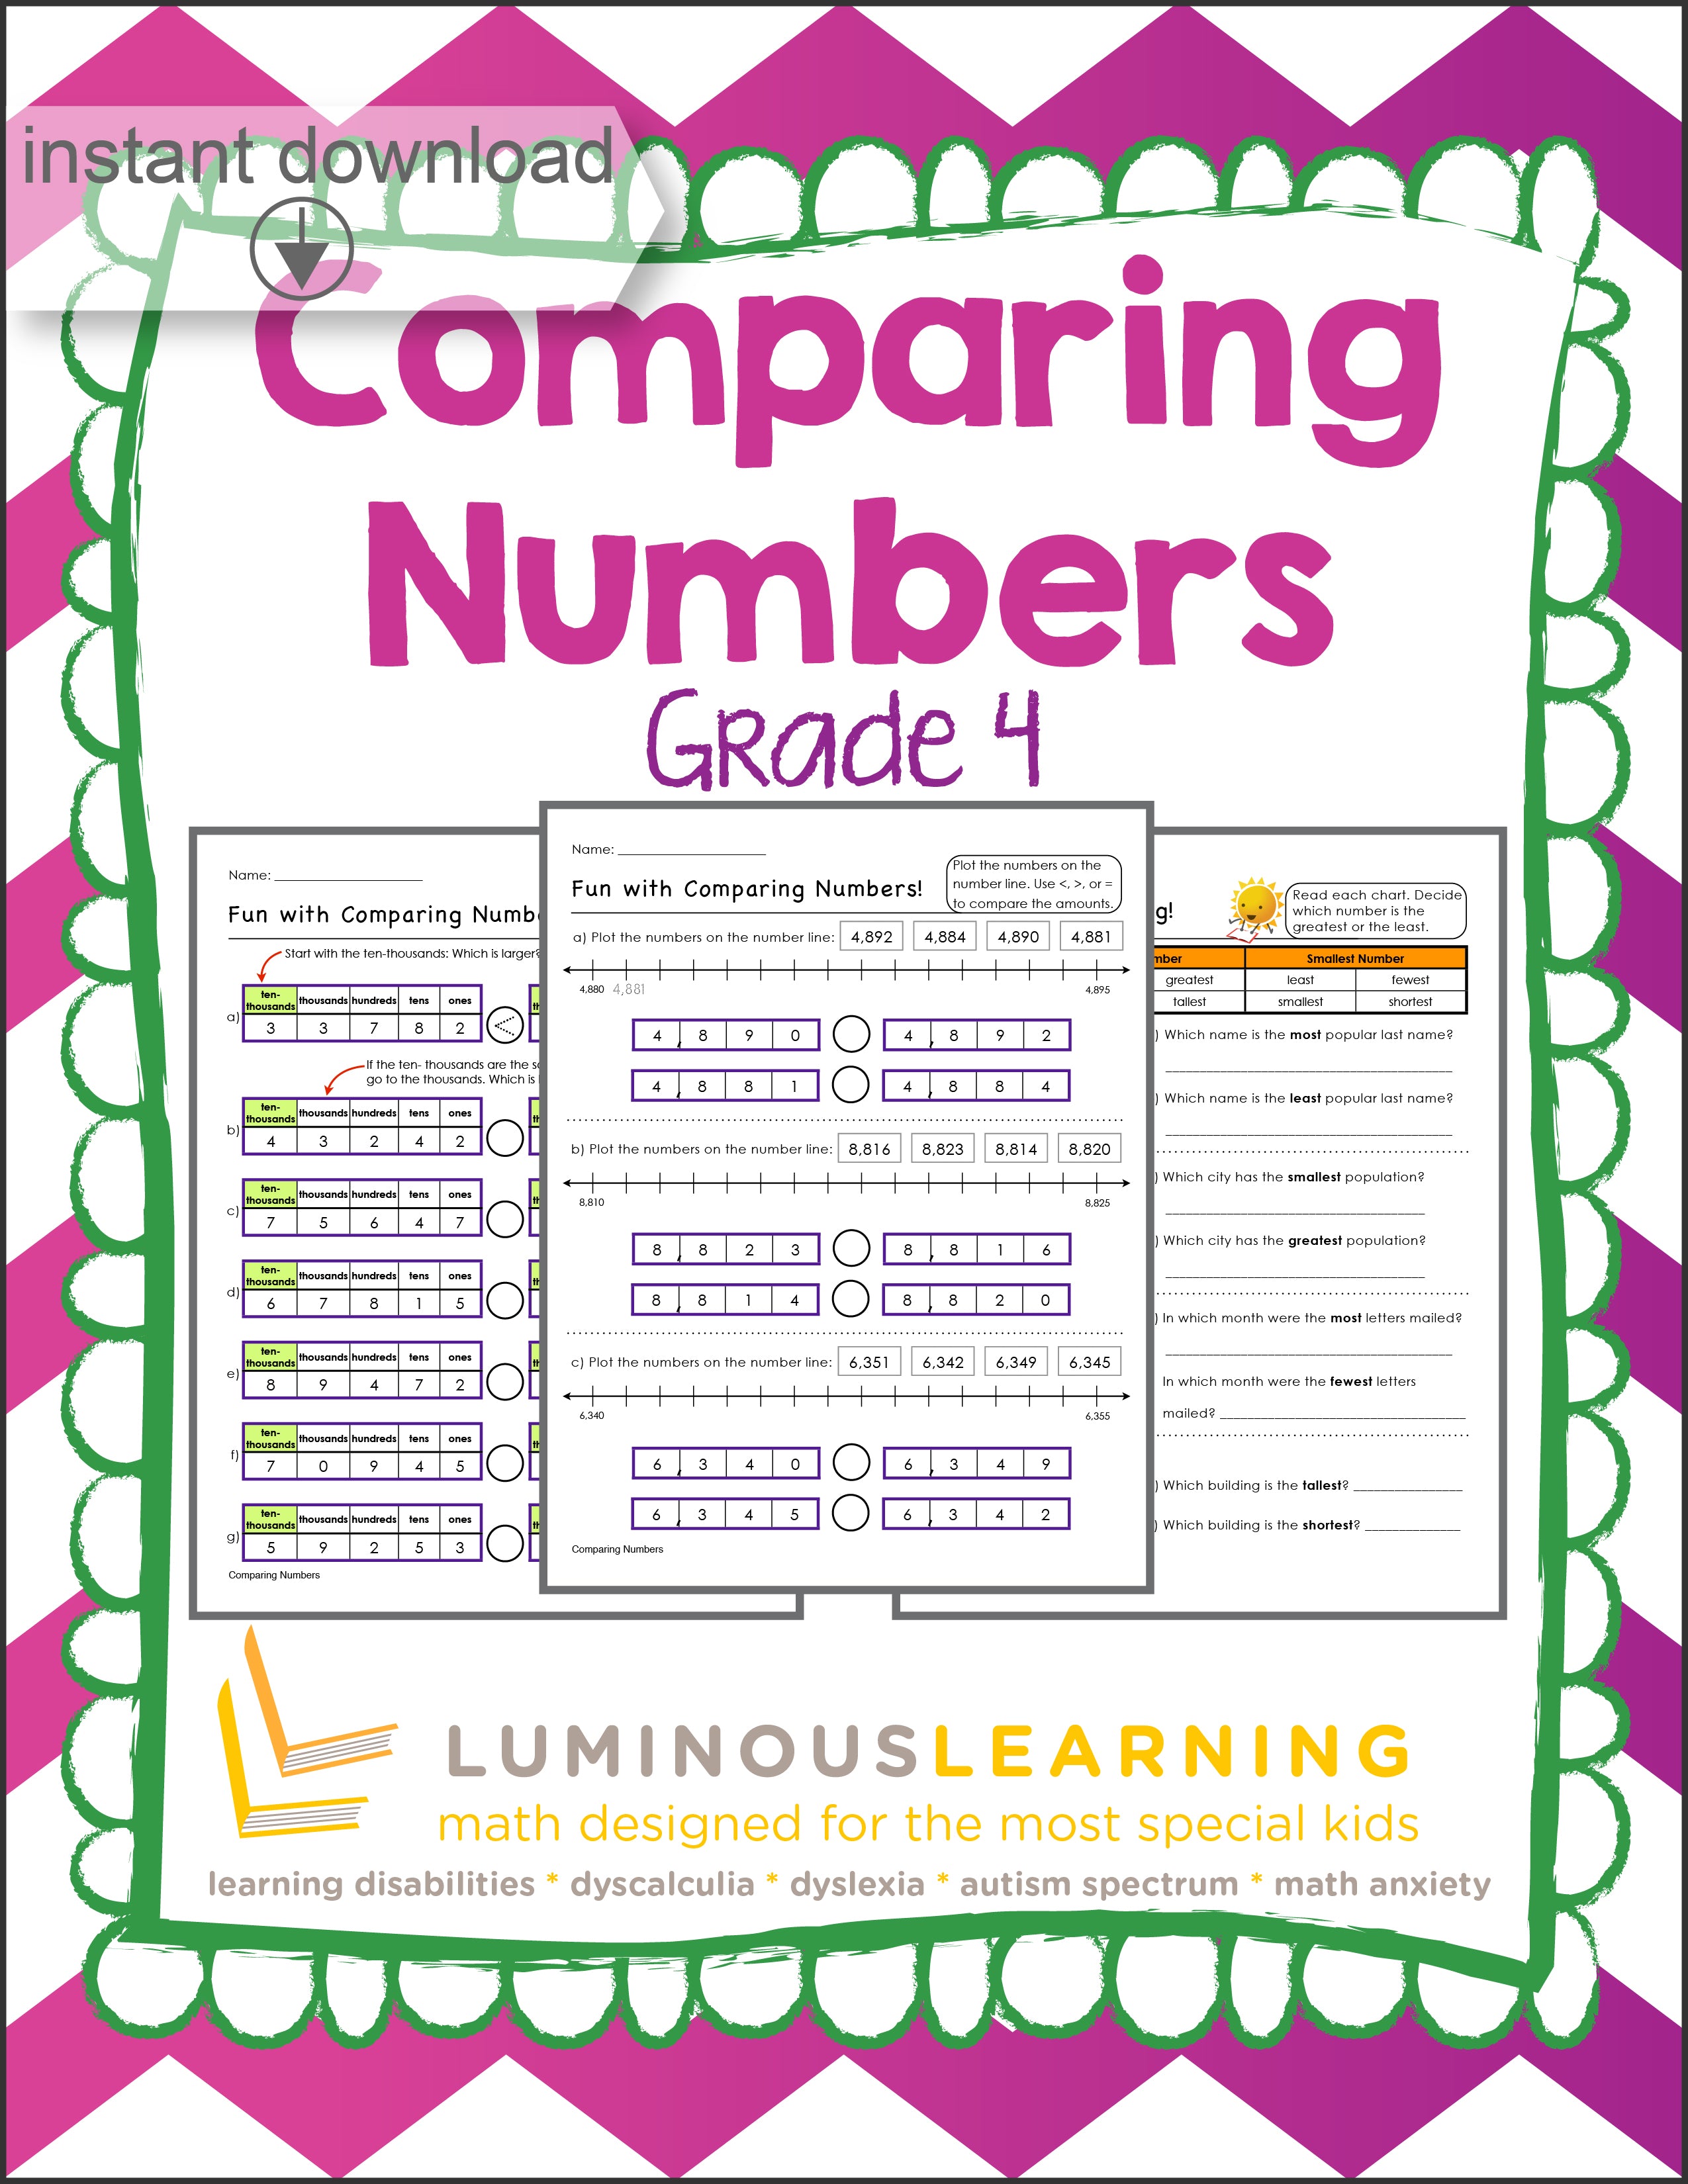 4th-grade-place-value-worksheets-comparing-and-ordering-numbers-common-core-4th-grade-place